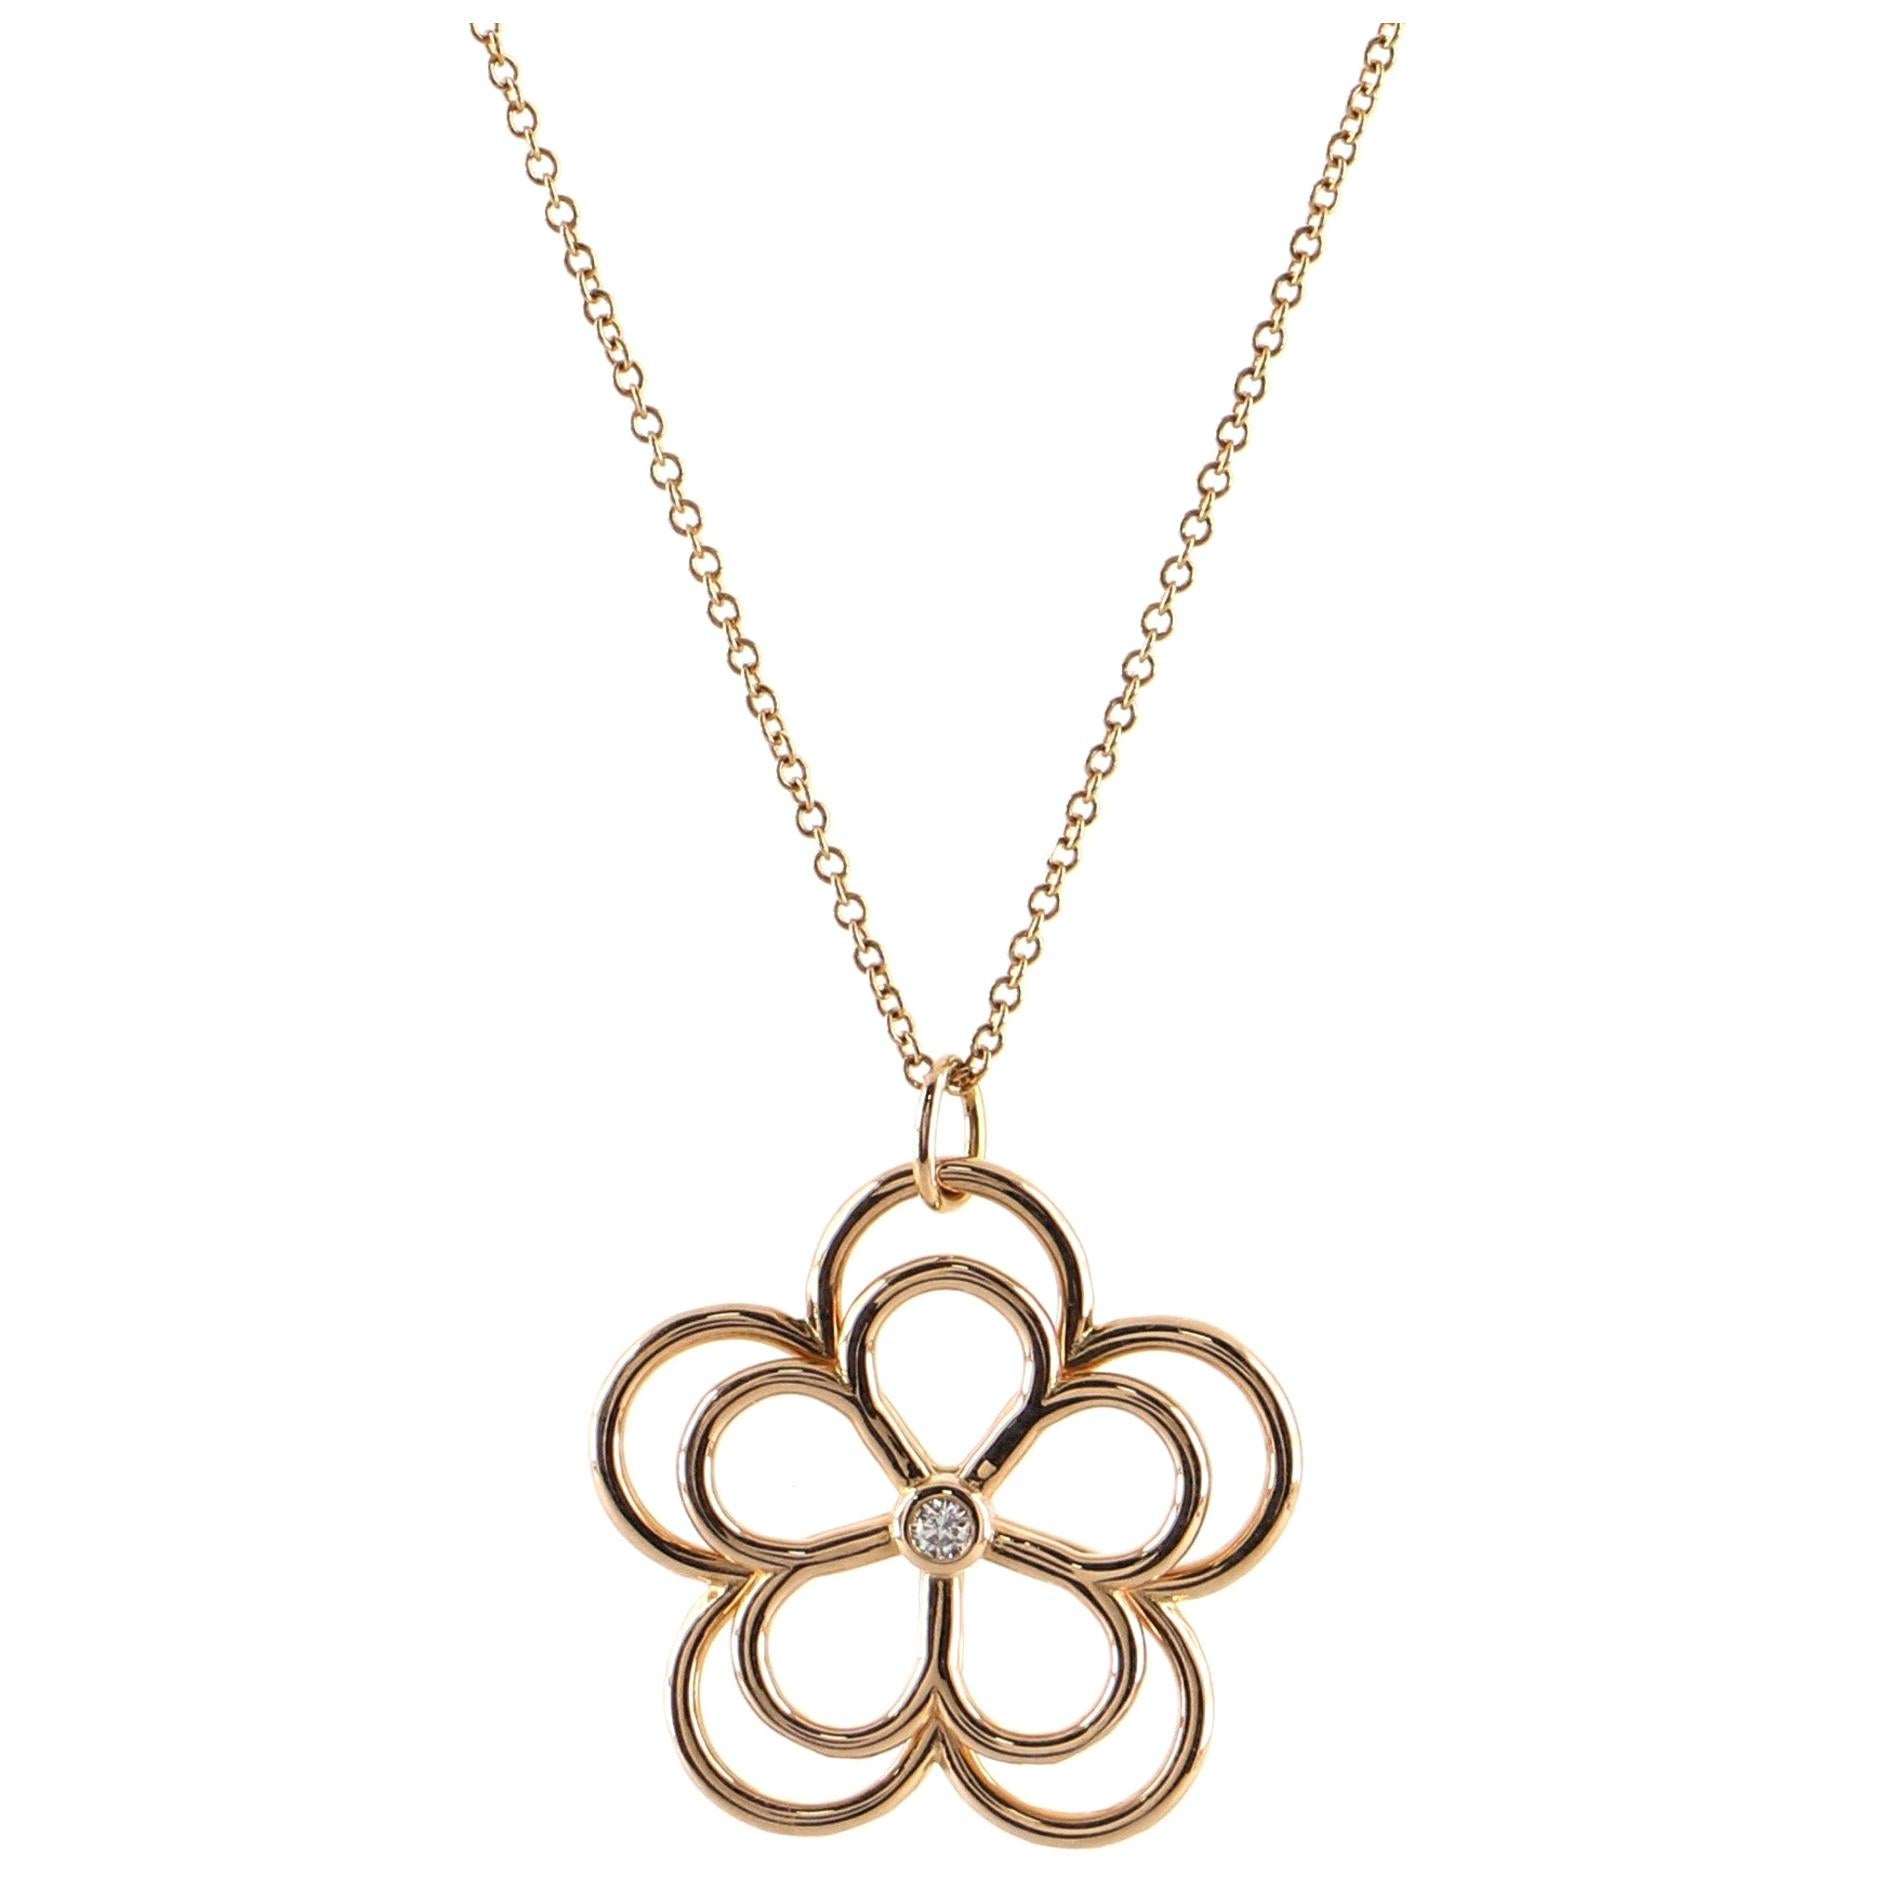 Tiffany & Co. Garden Open Flower Pendant Necklace 18K Rose Gold and Diamond